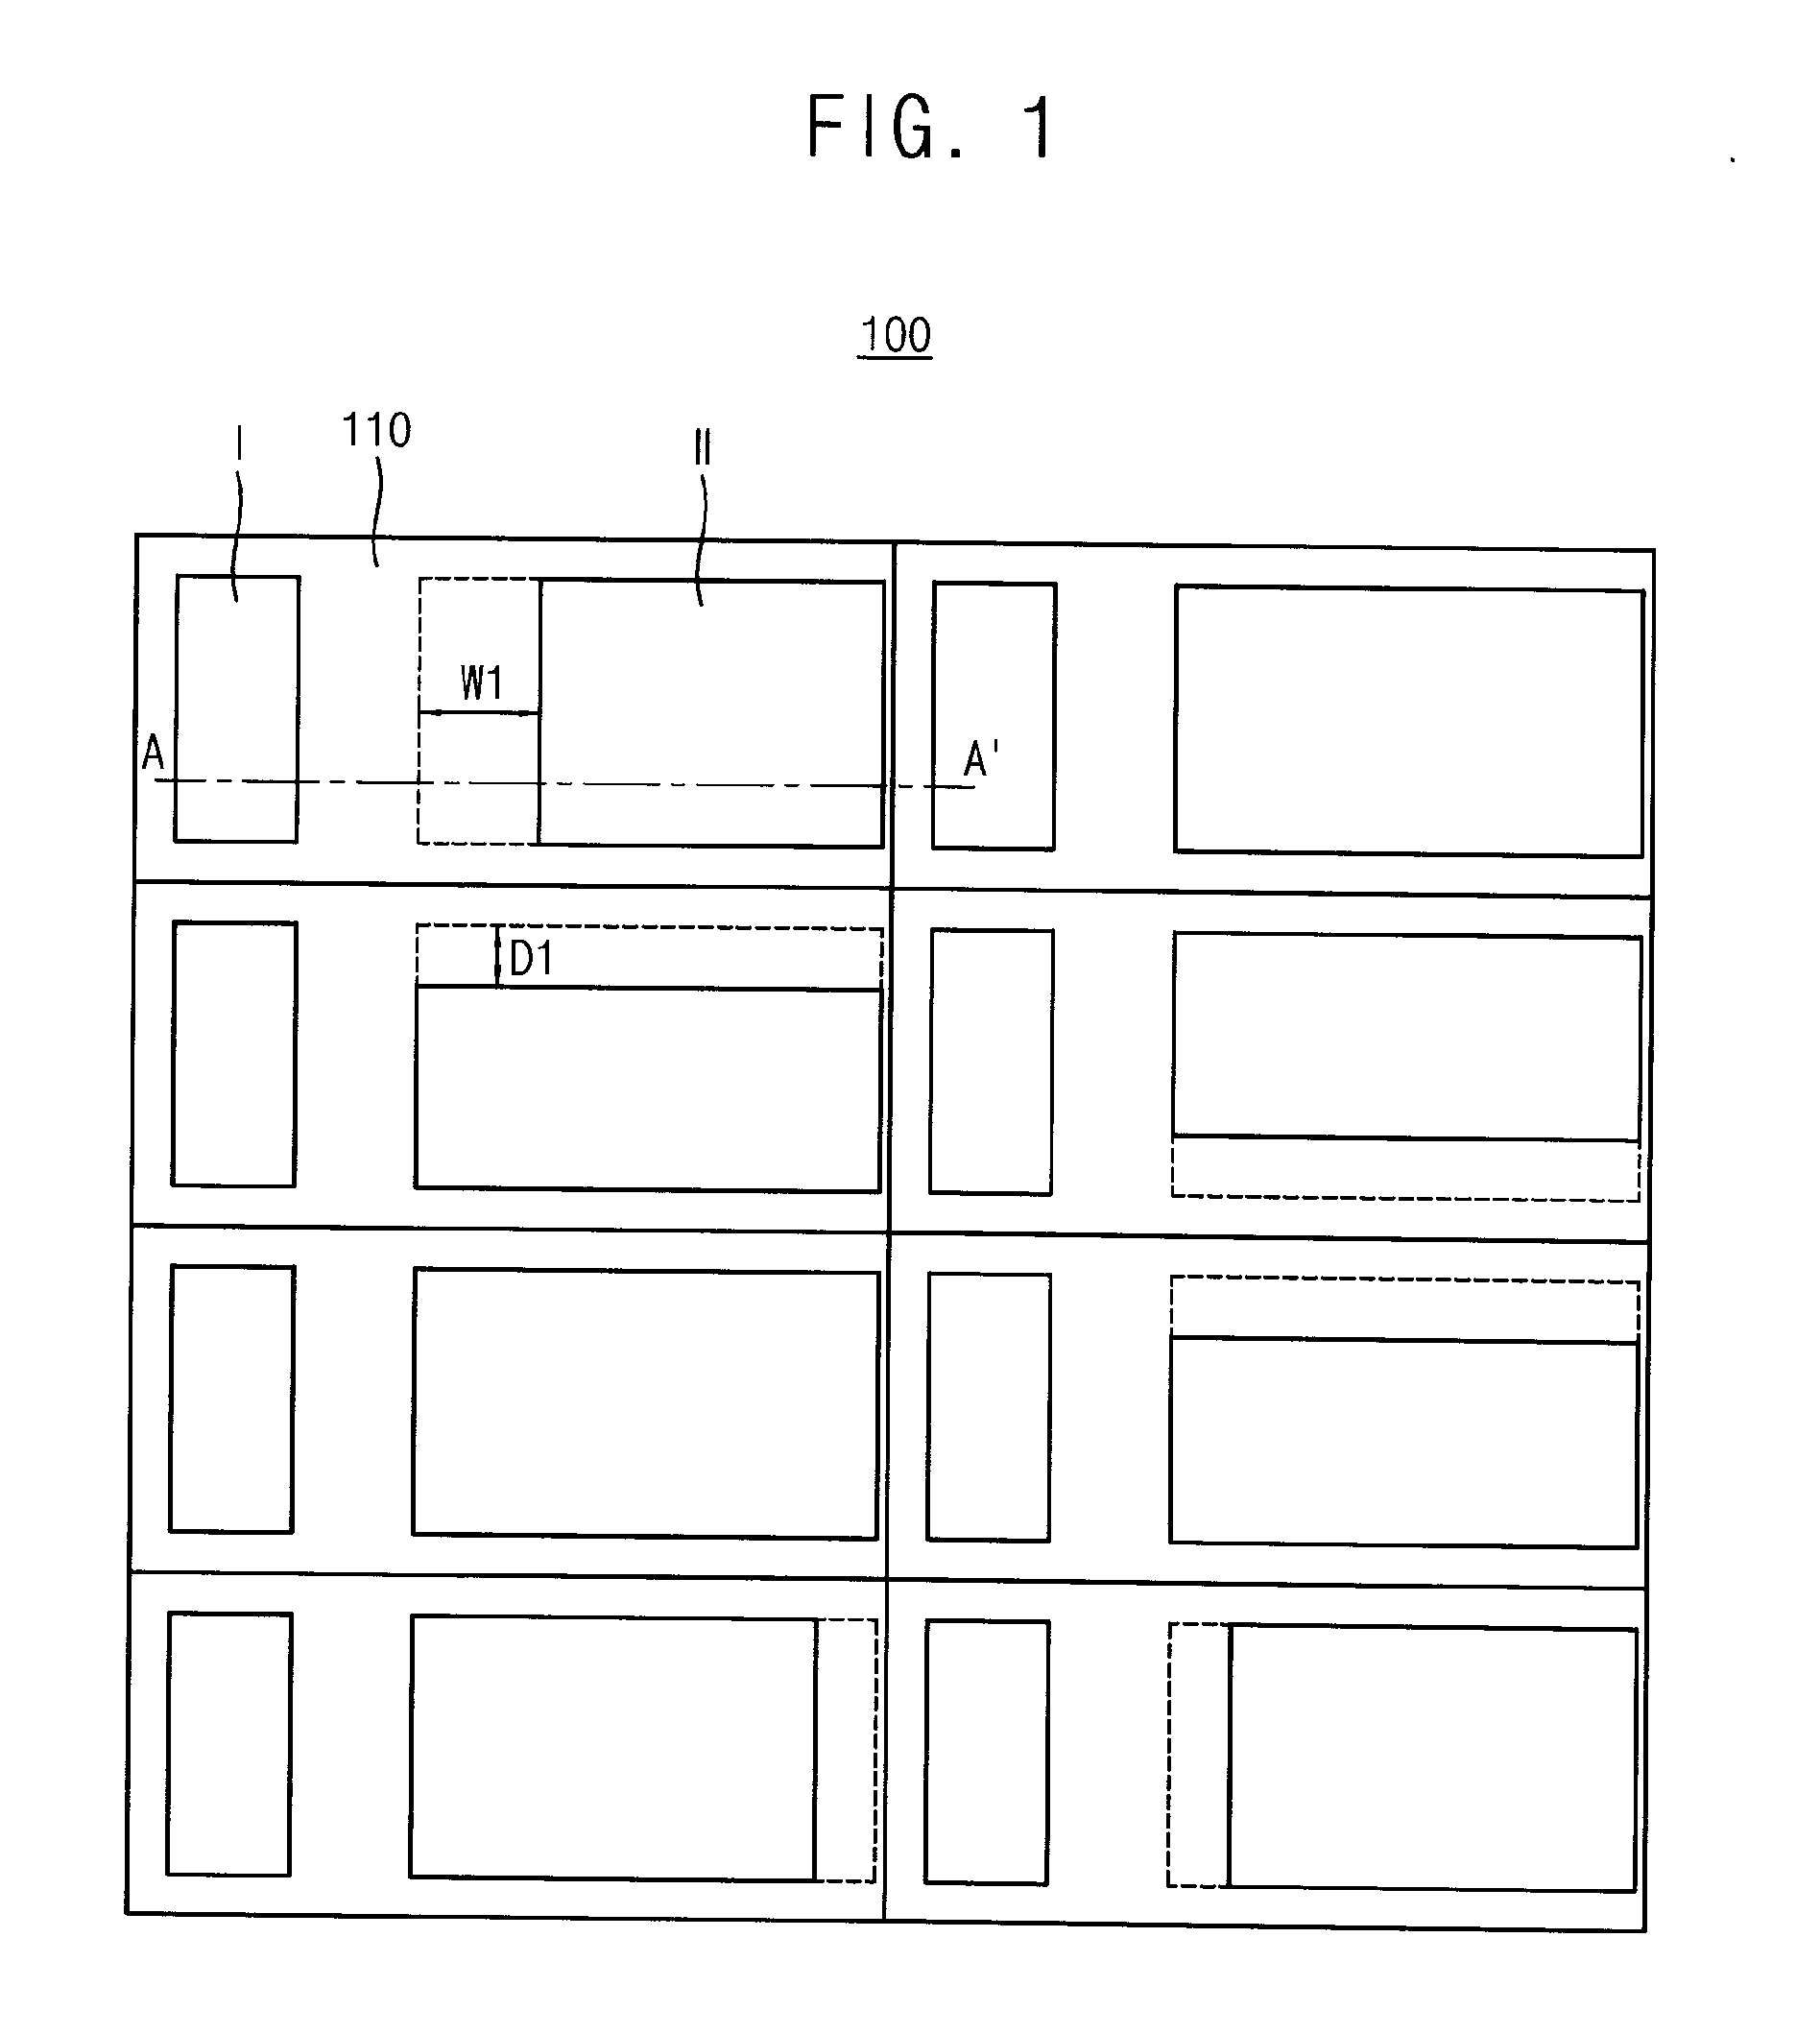 Organic light emitting display devices and methods of manufacturing organic light emitting display devices